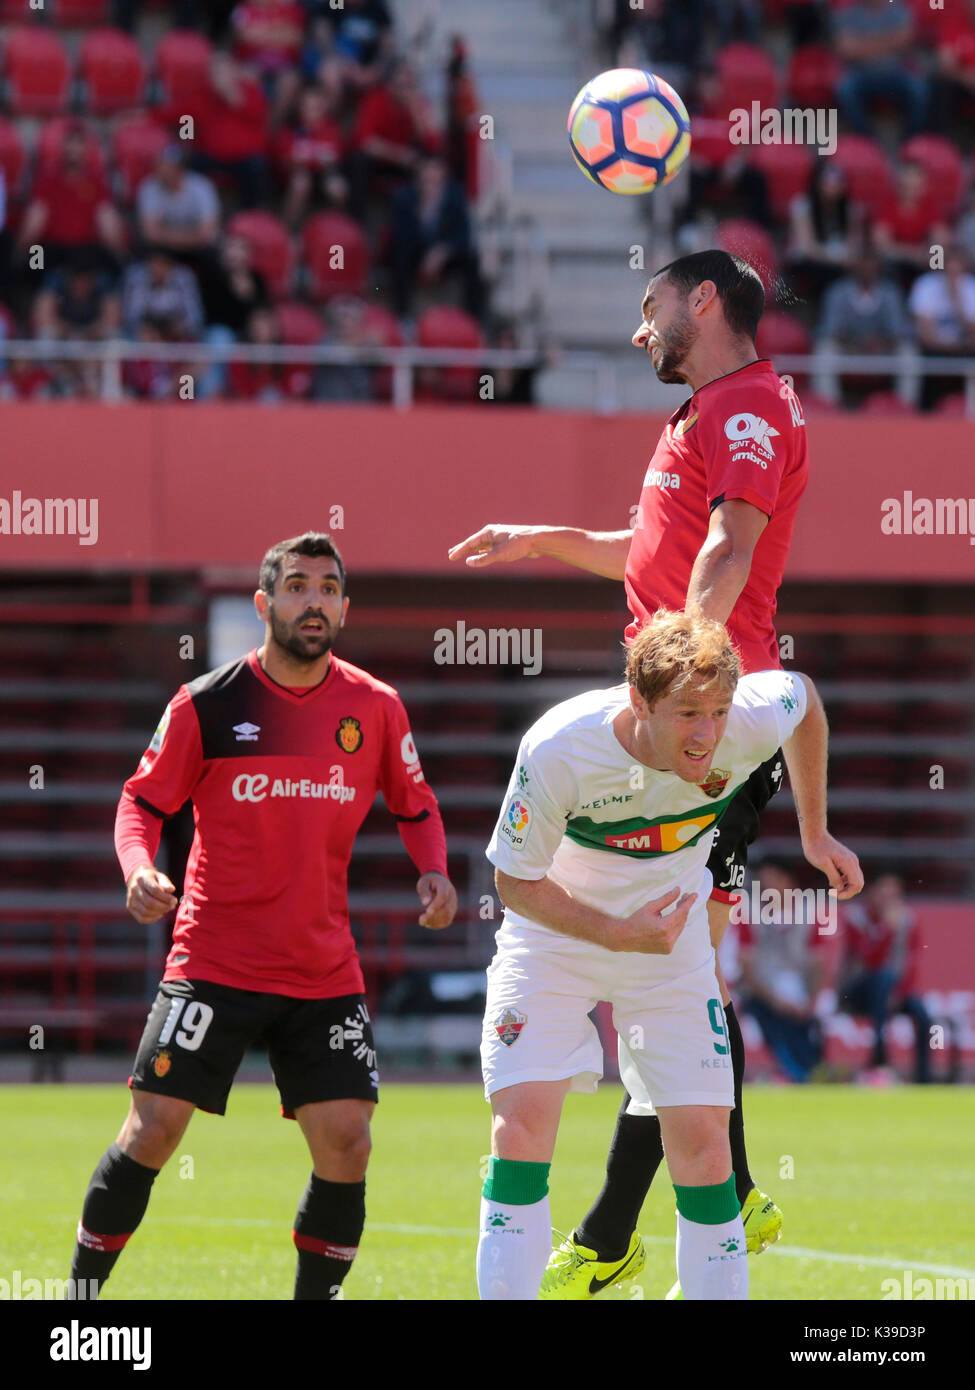 Real Mallorca player heads the ball against Sevilla atlético player during a match in Mallorca. Stock Photo